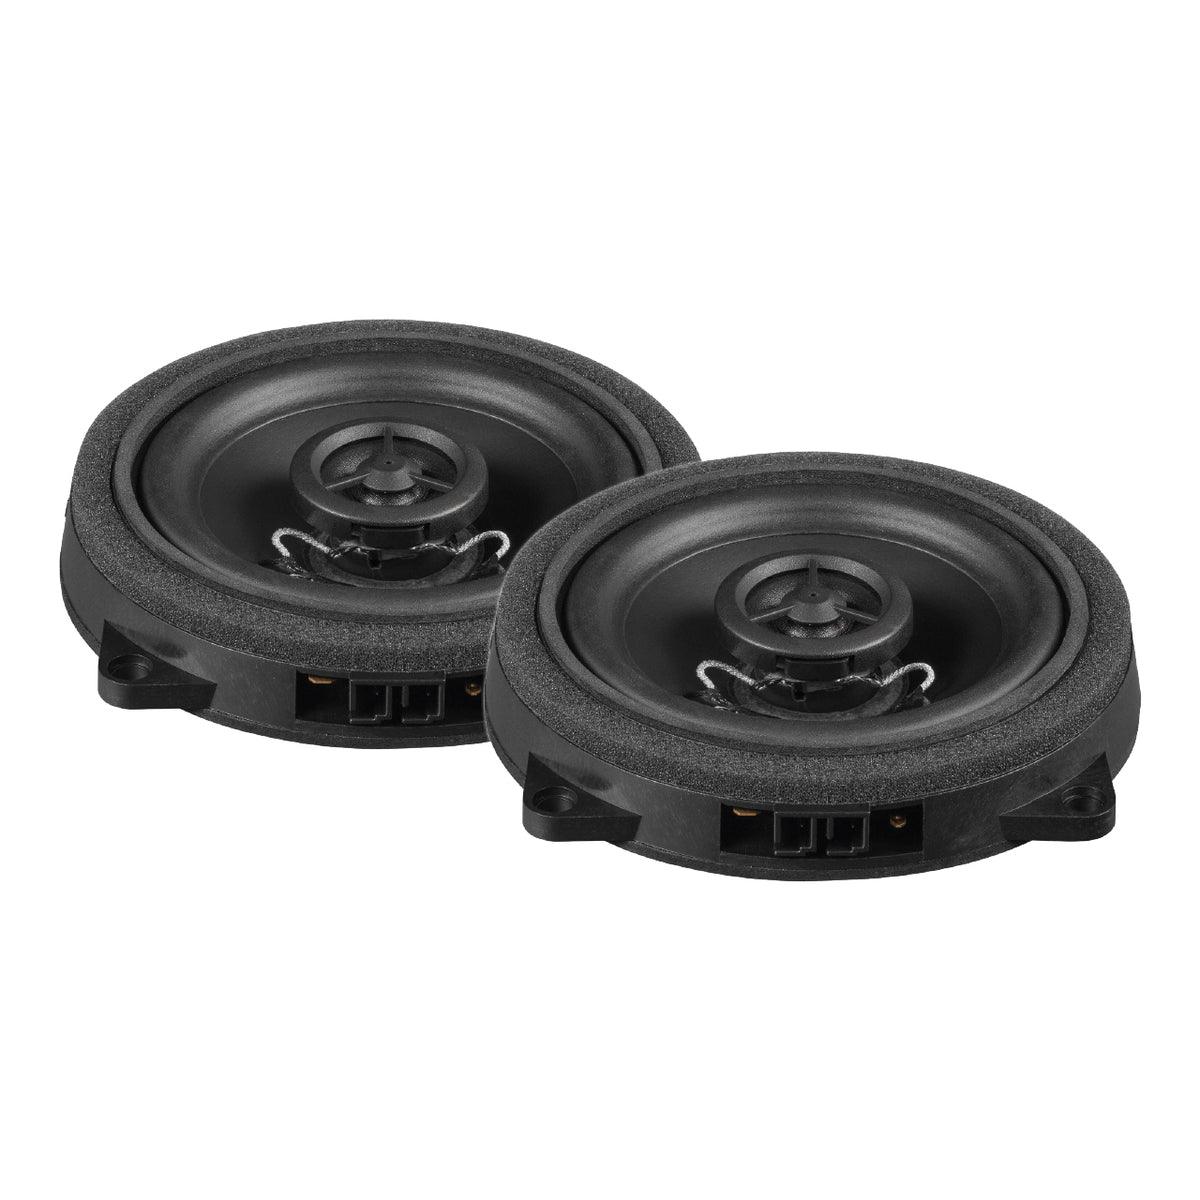 Match Up X4BMW-FRT.2 Coaxial Speakers